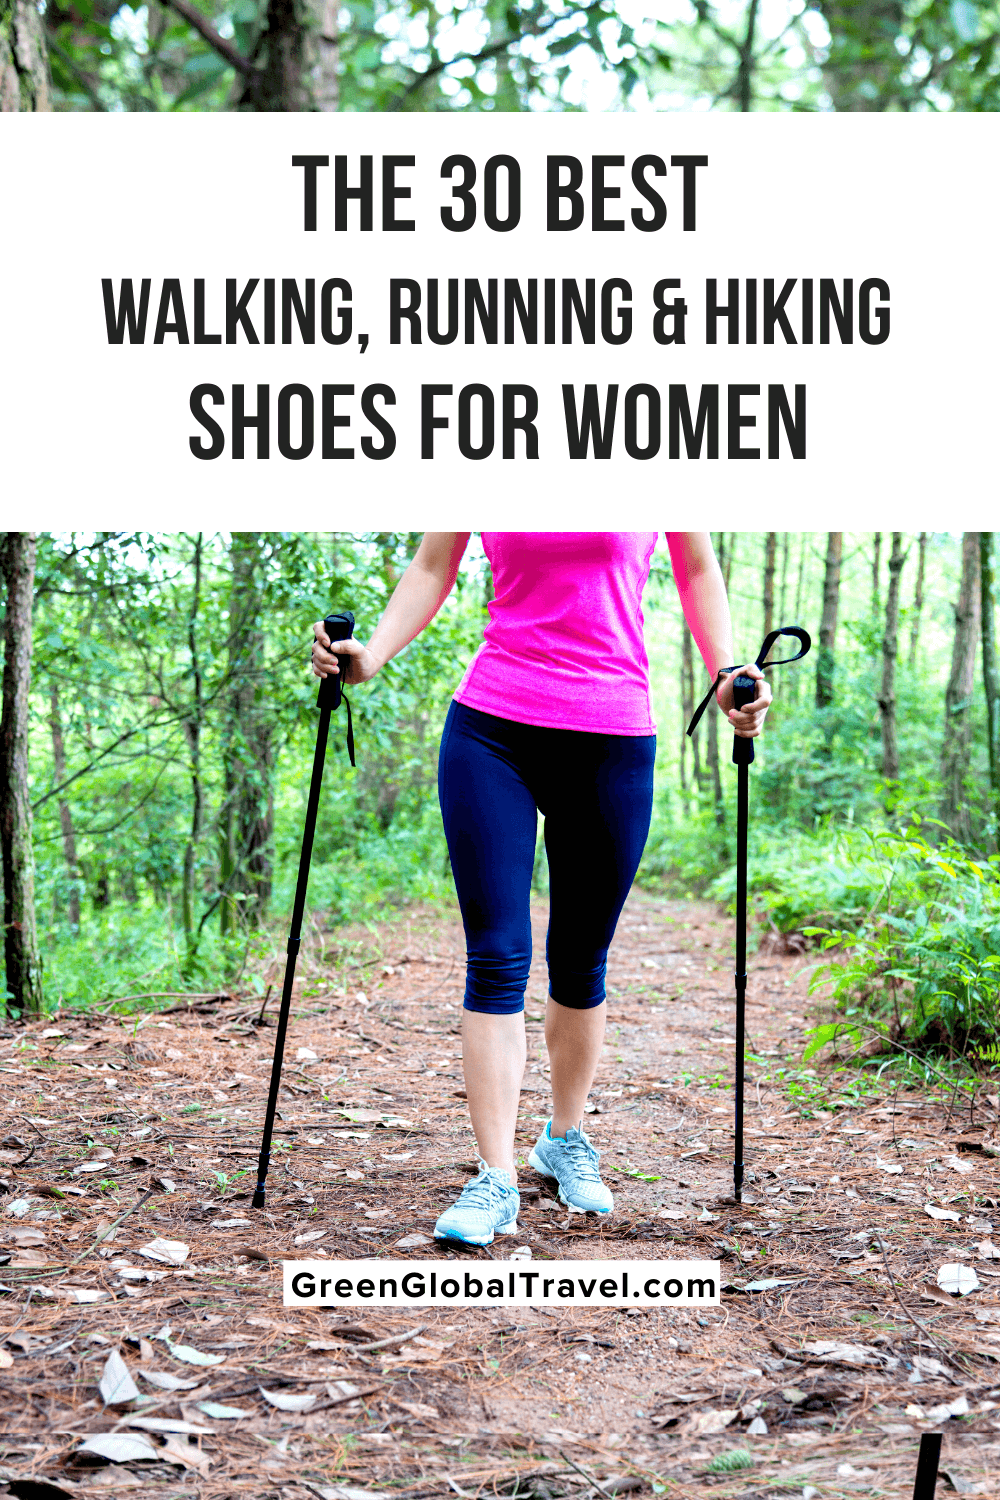 The 30+ best women's hiking, running and walking shoes for 2021, from fun and fashionable to technical shoes designed to conquer any terrain. | womens hiking shoes | ladies walking boots | womens hiking boots | womens waterproof walking boots | womens walking shoes | ladies walking shoes | best sneakers for walking | women's walking shoes with arch support | walking sneakers | cushion walk shoes | ladies waterproof walking shoes | best trail running shoes for women | trail shoes women |